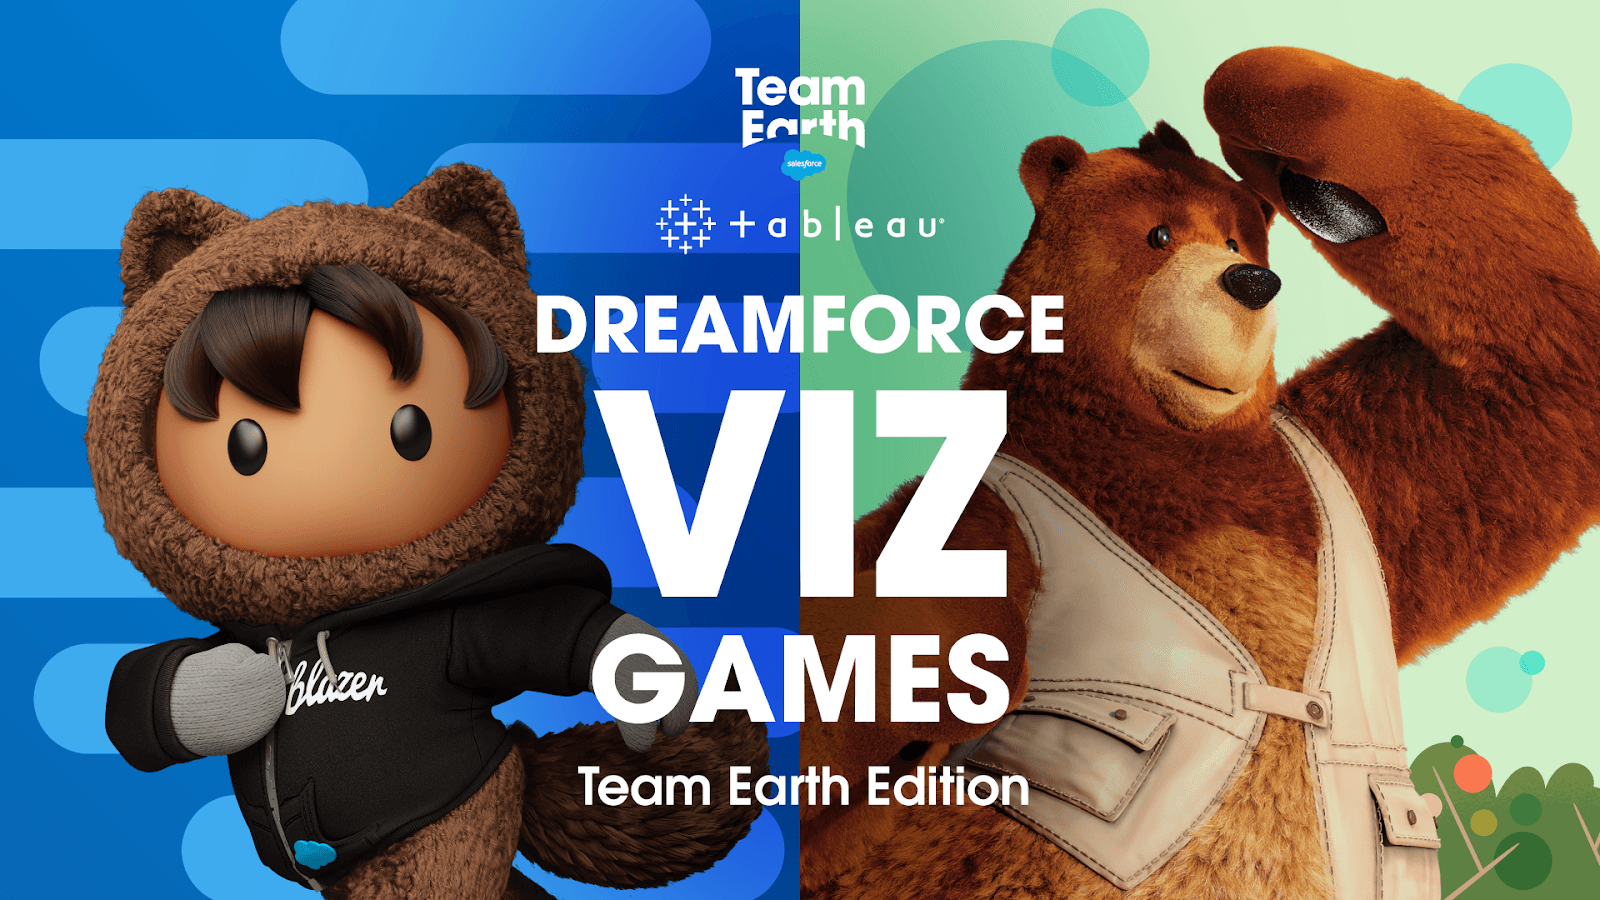 Image of Astro character and Cody, the bear character on blue and green background that reads "Dreamforce Viz Games: Team Earth Edition" with the Tableau logo and the Team Earth logo 